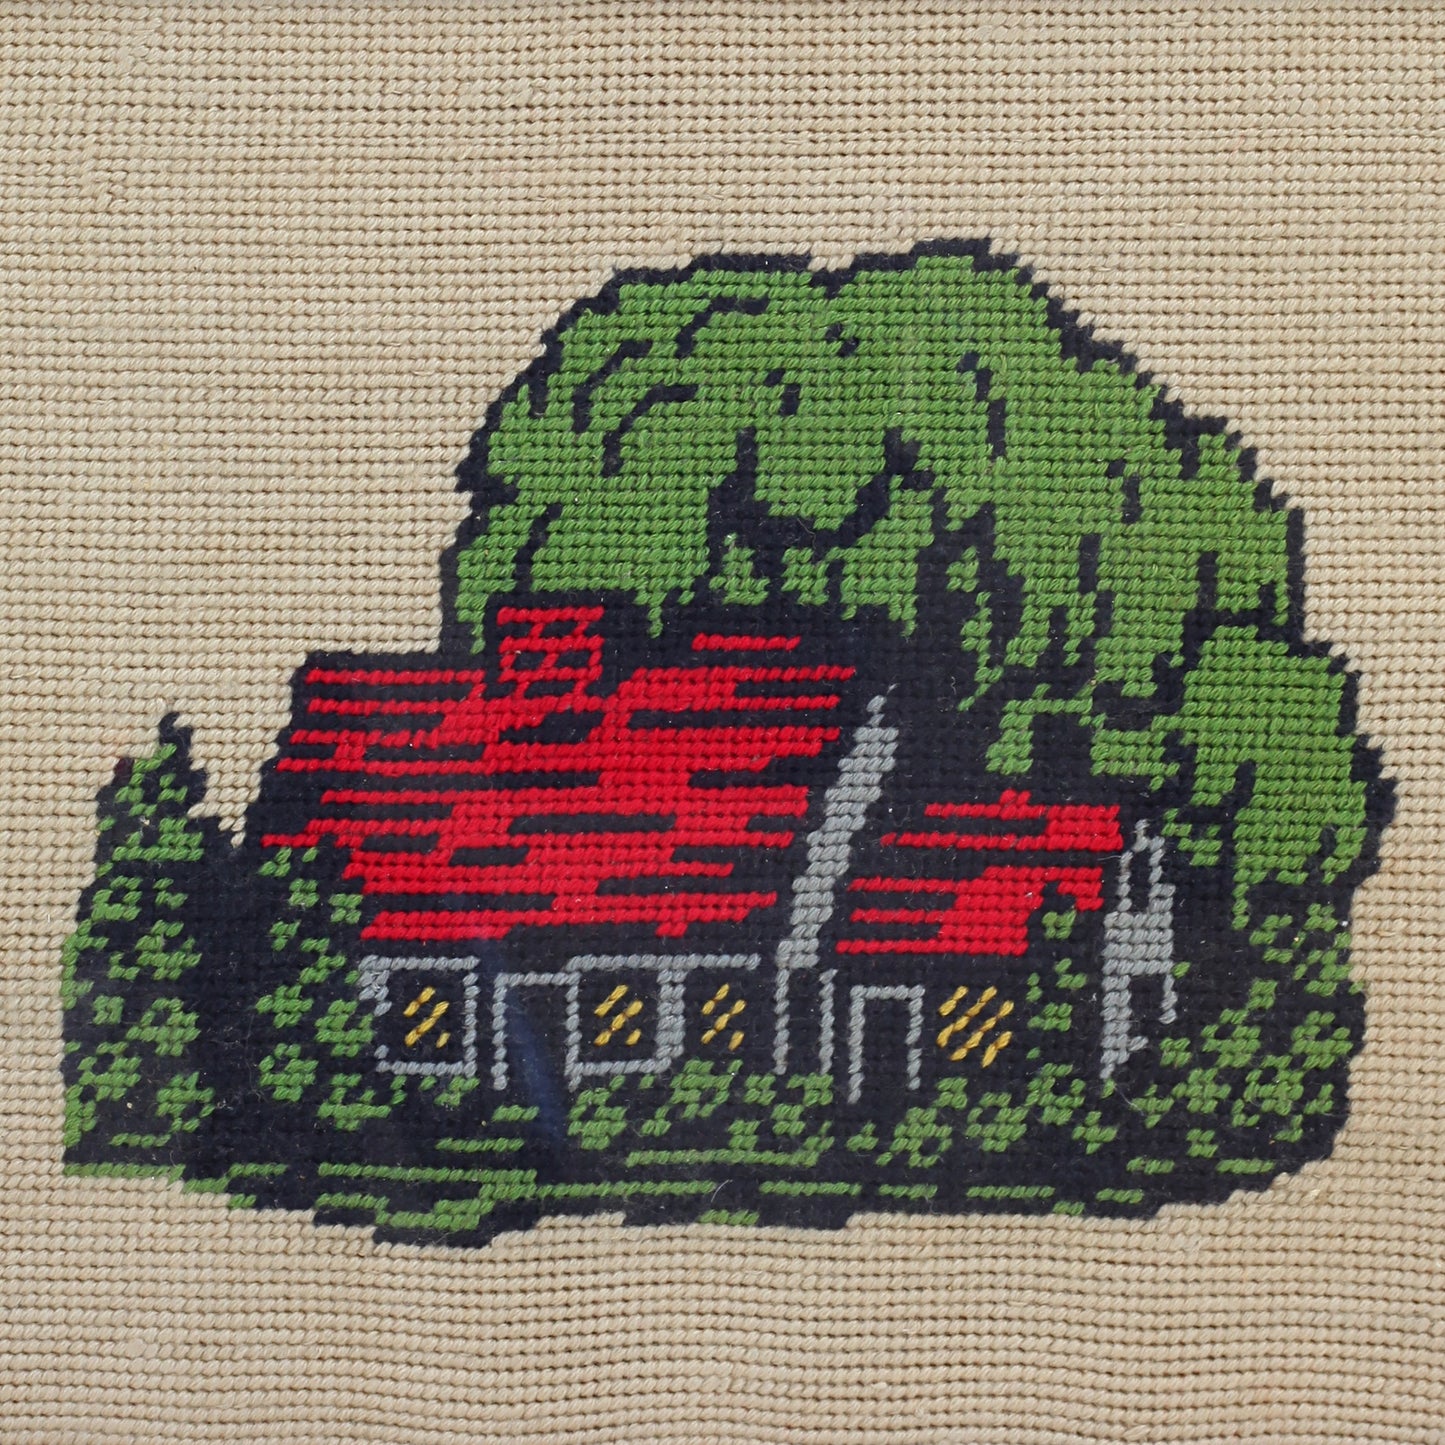 SOLD - Vintage Colorful Cottage Needlework Embroidery